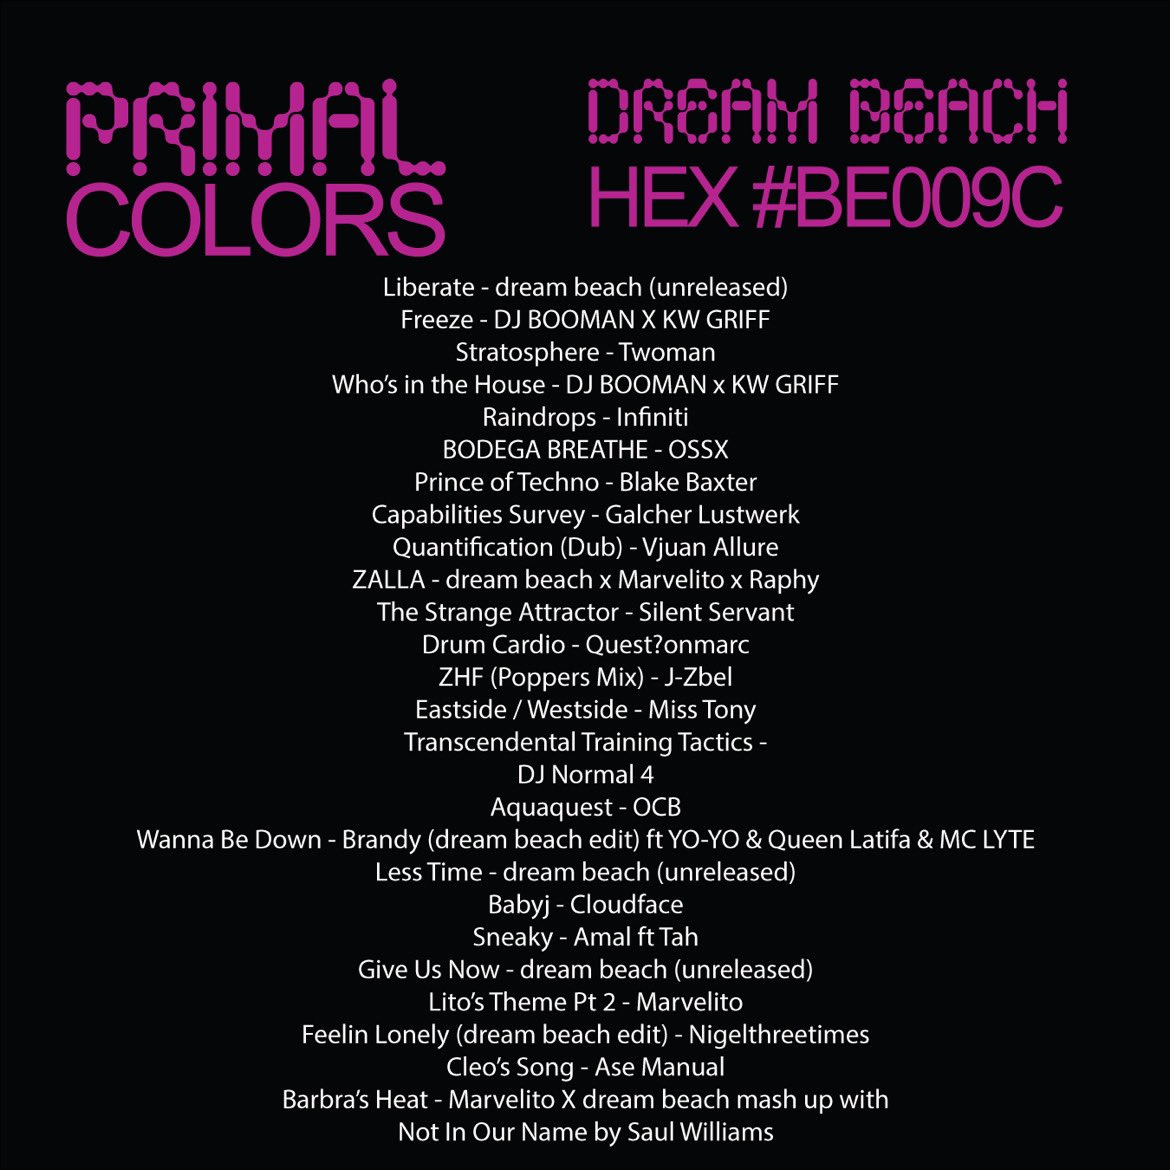 NEW MIX TODAY FOR PRIMAL COLORS DETROIT HEX CODE SERIES… NEW UNRELEASED JOINTS…. I WANTED TO EXPRESS DISMAY 4 THE CURRENT STATE OF AFFAIRS ON PLANET EARTH I FUCKIN CANT STAND THE WAY WE HURT EACHOTHER THE WAY EVIL IS KING WHILE WE AWAIT RARE MOMENTS OF HOPE… LIBERATION TO ALL